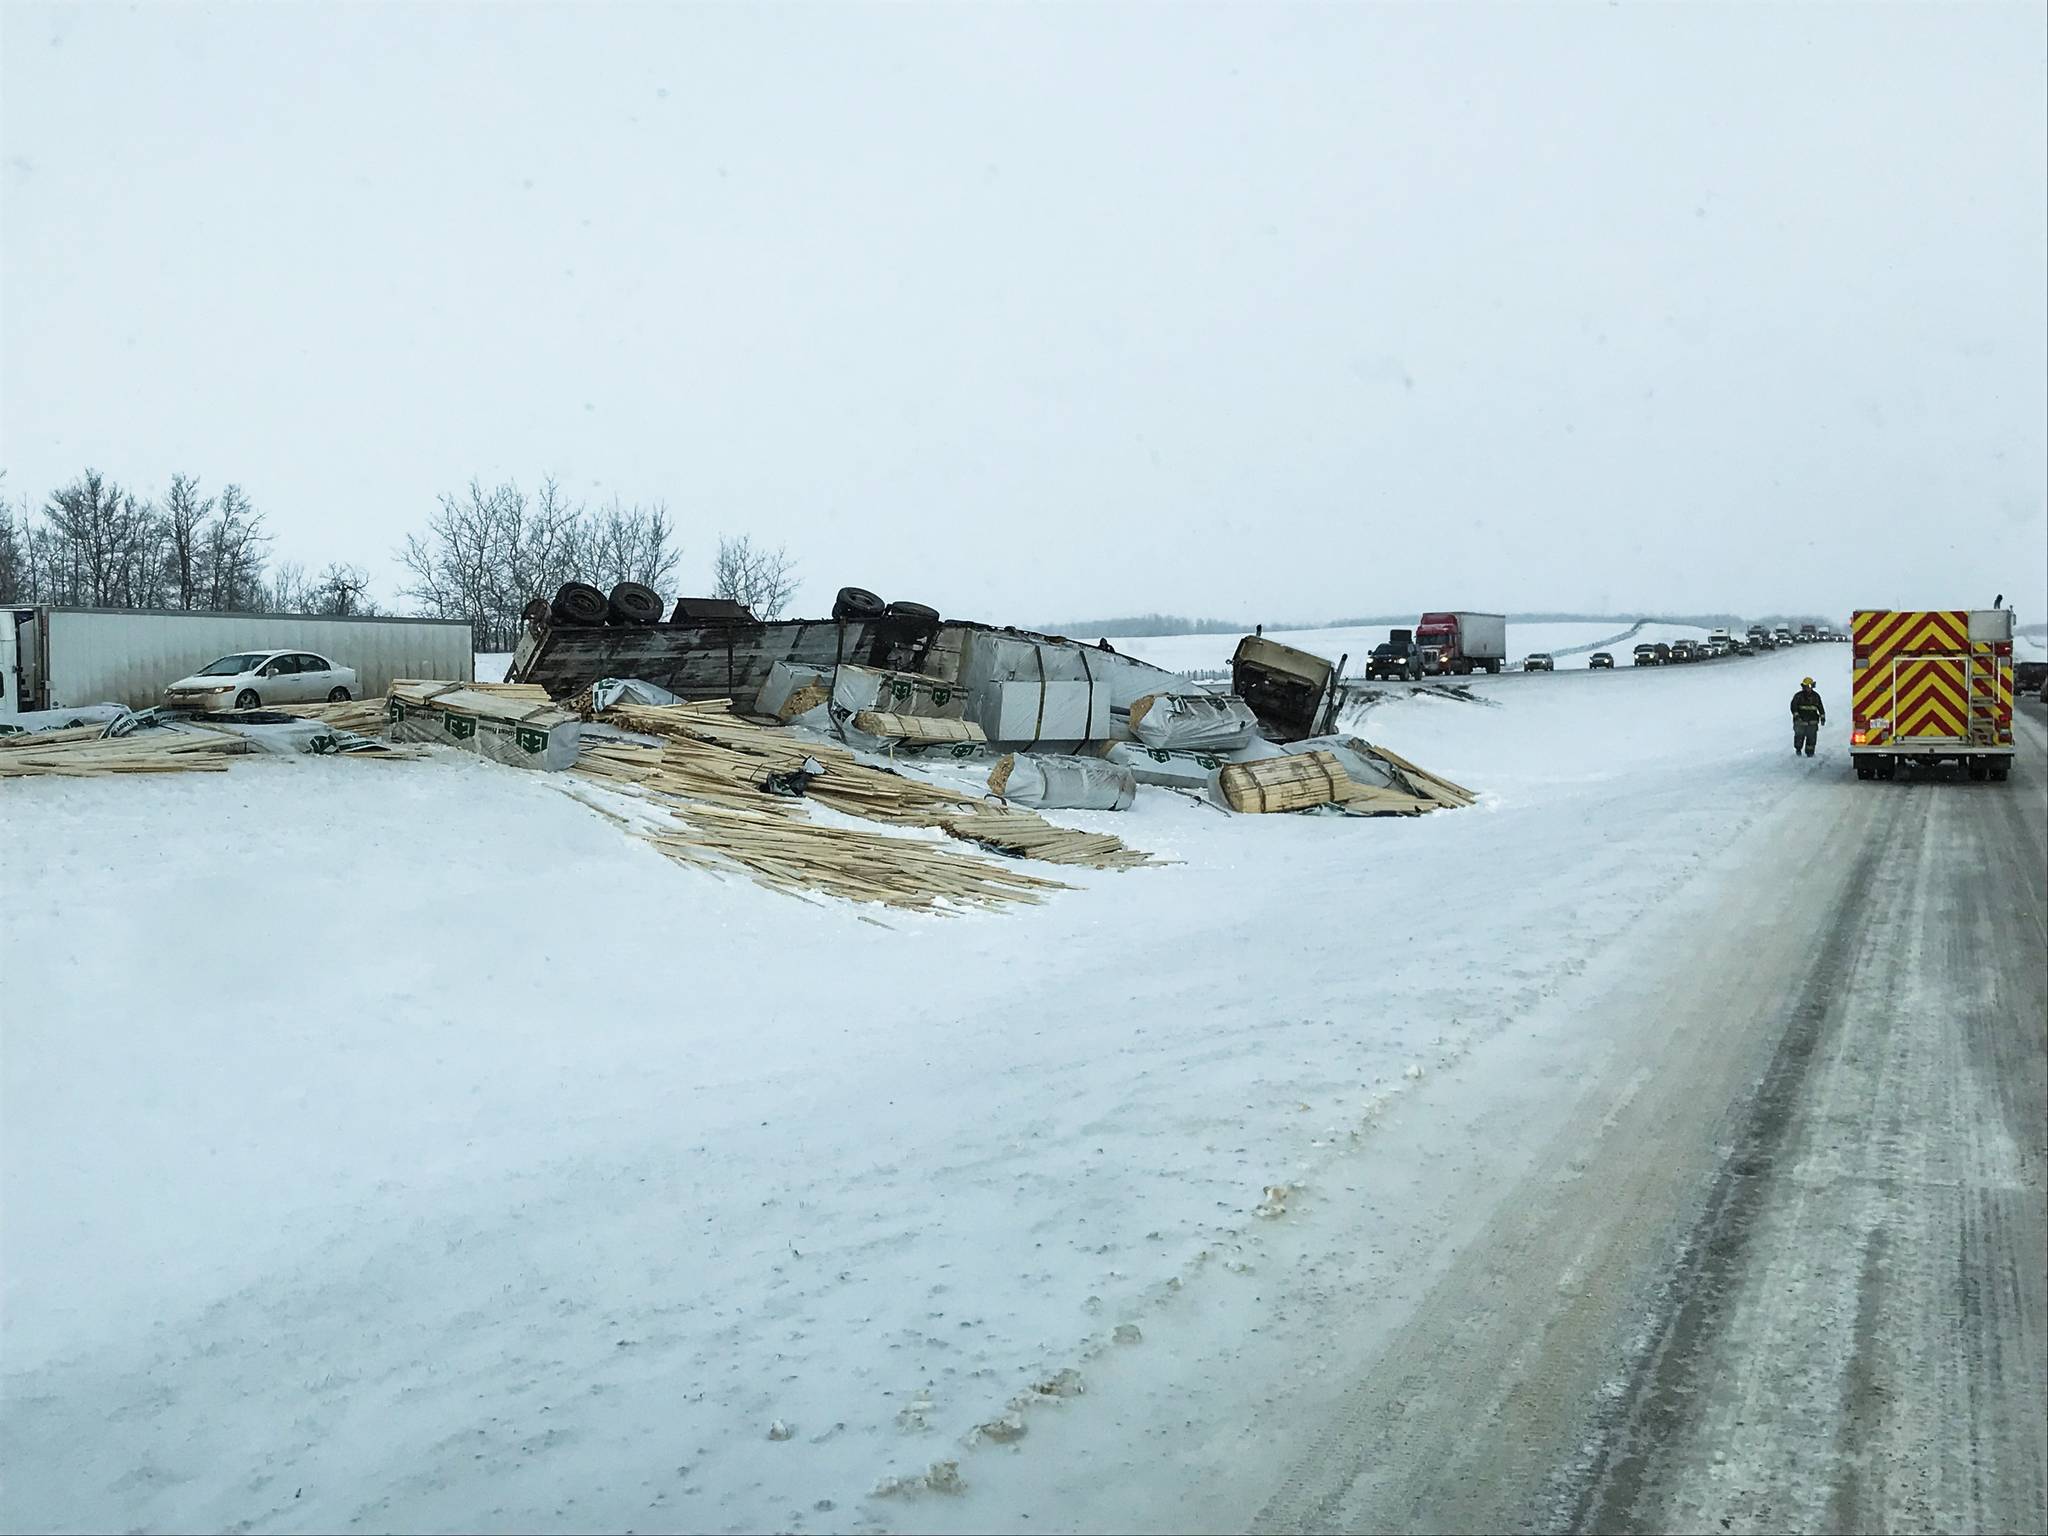 Semi loses lumber on QE2: Wintry road conditions on the QE2 near Ponoka continued to wreak havoc for motorists. At about 10:45 a.m. Friday morning a southbound semi tractor hauling lumber rolled in the median just north of Ponoka.                                Photos submitted